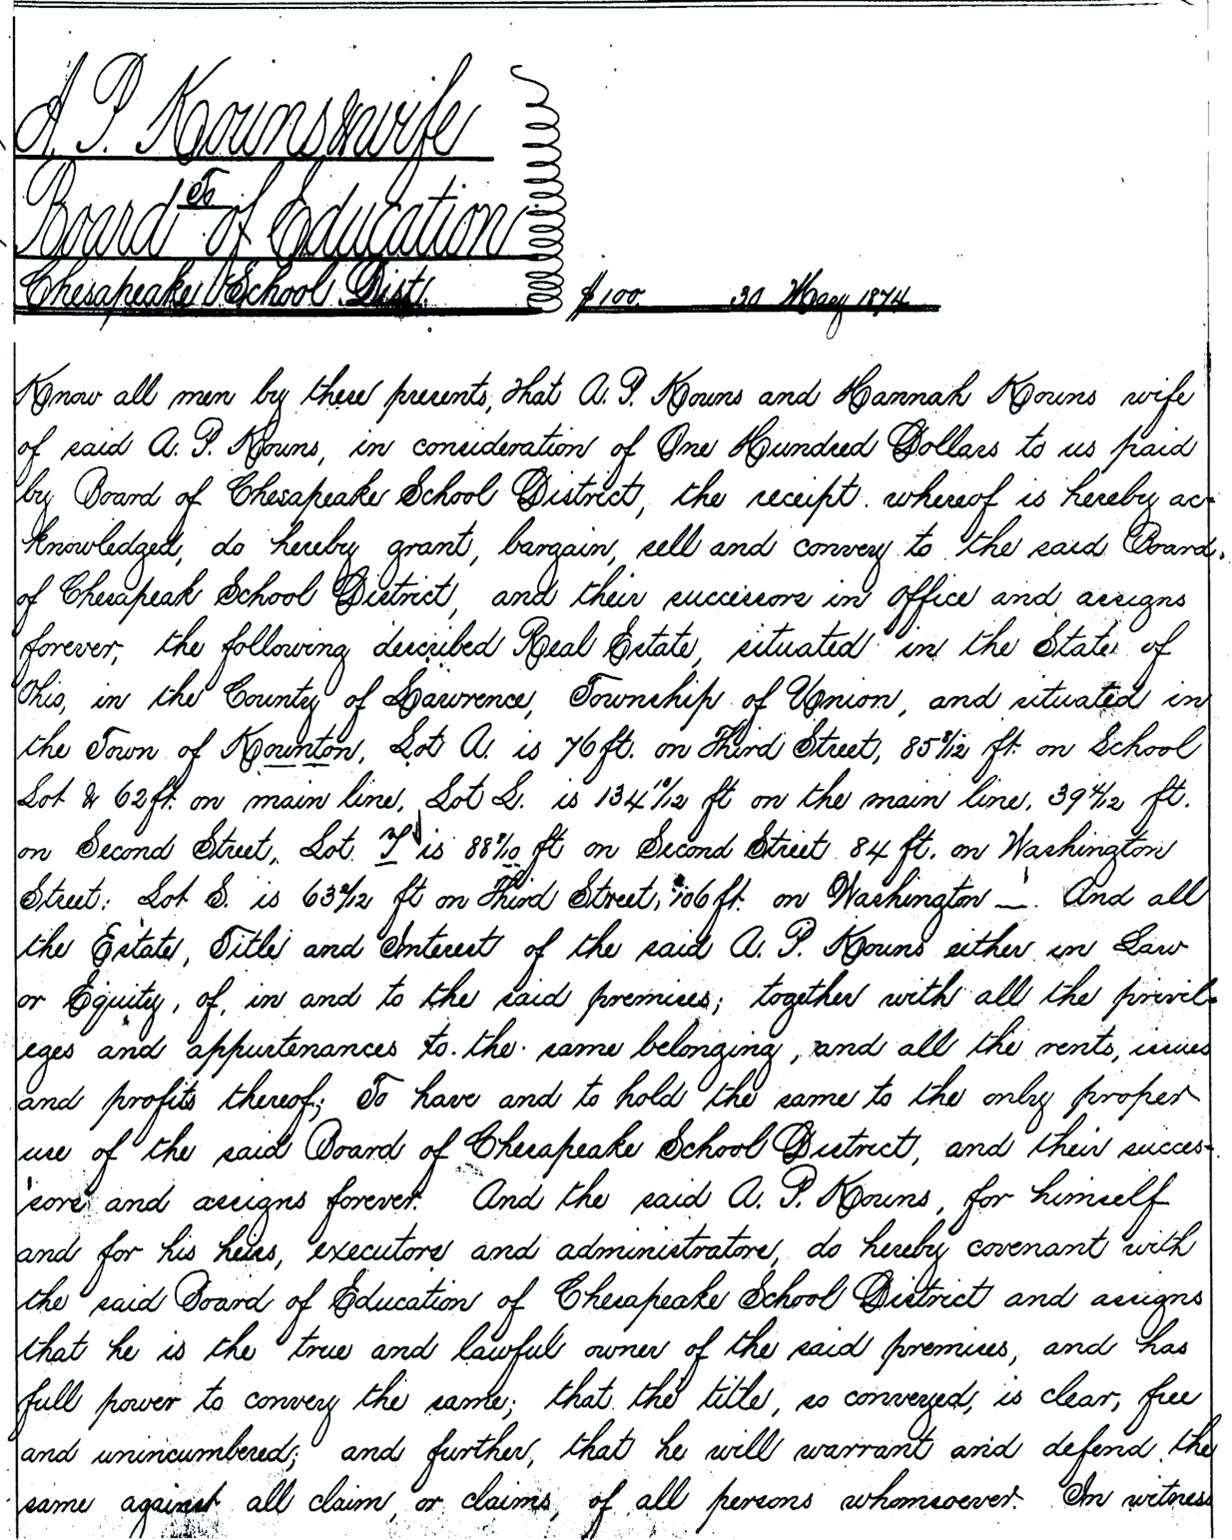 Law. Co., Ohio Deed Book 33, page 340